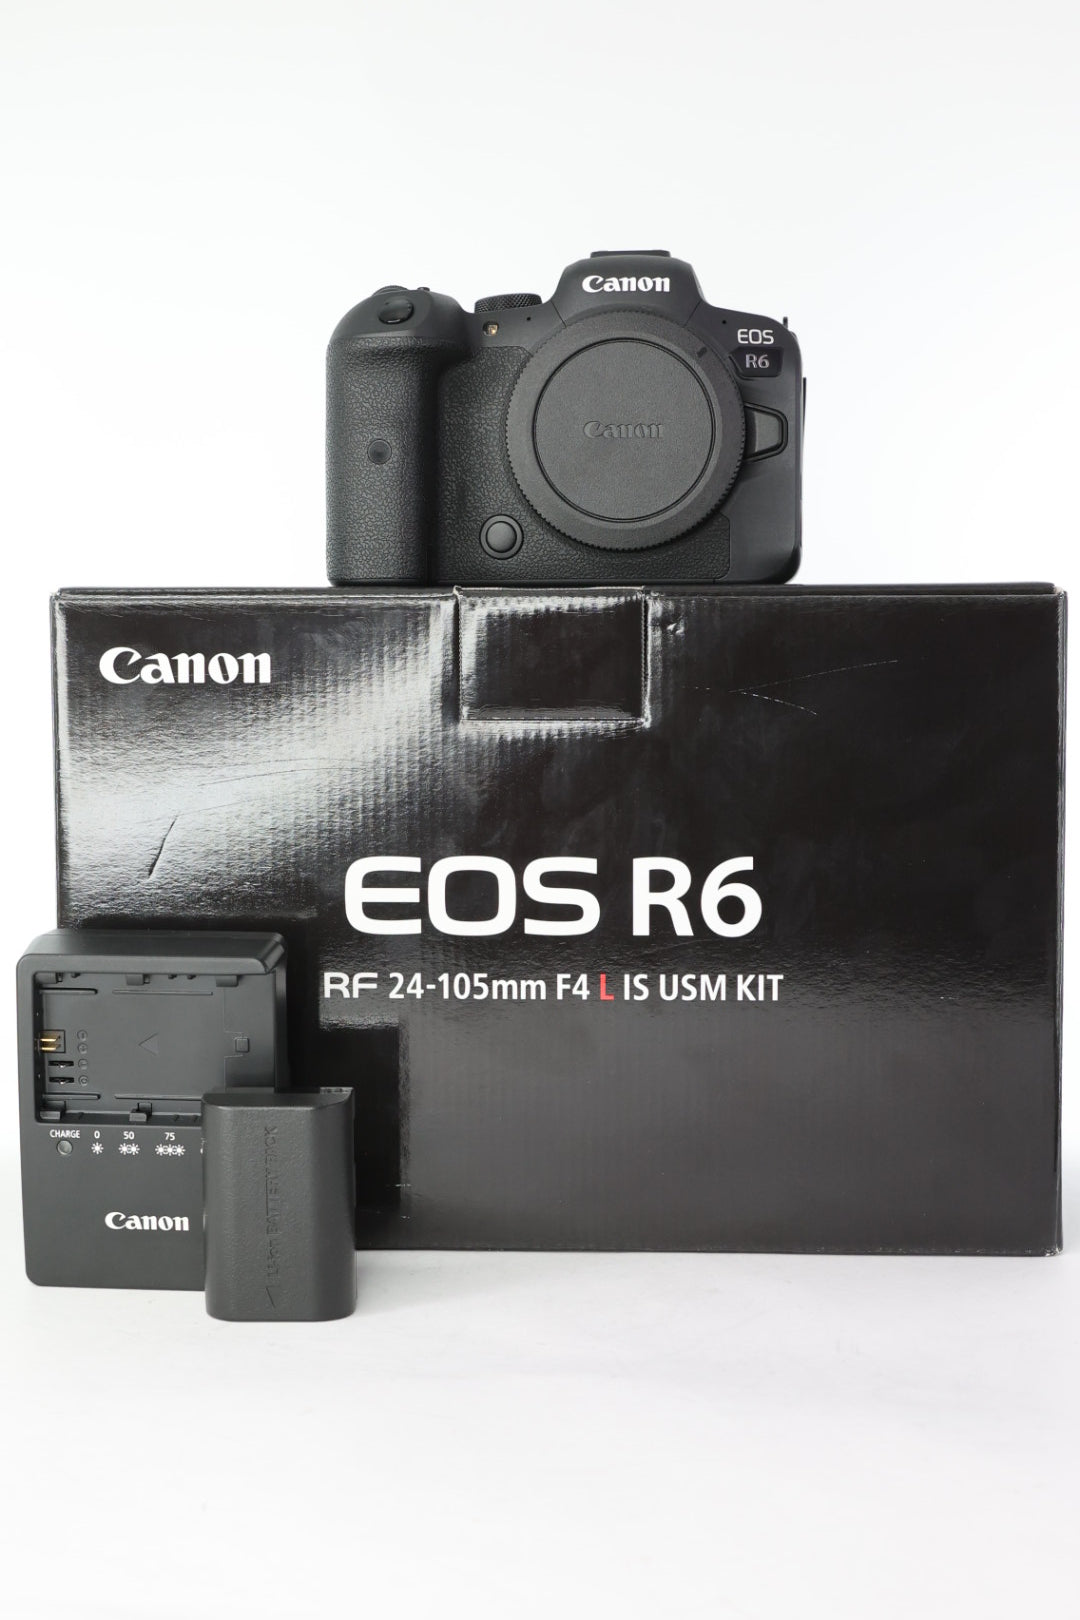 Canon EOSR6/01160, Mirrorless Digital Camera, Body Only, Used